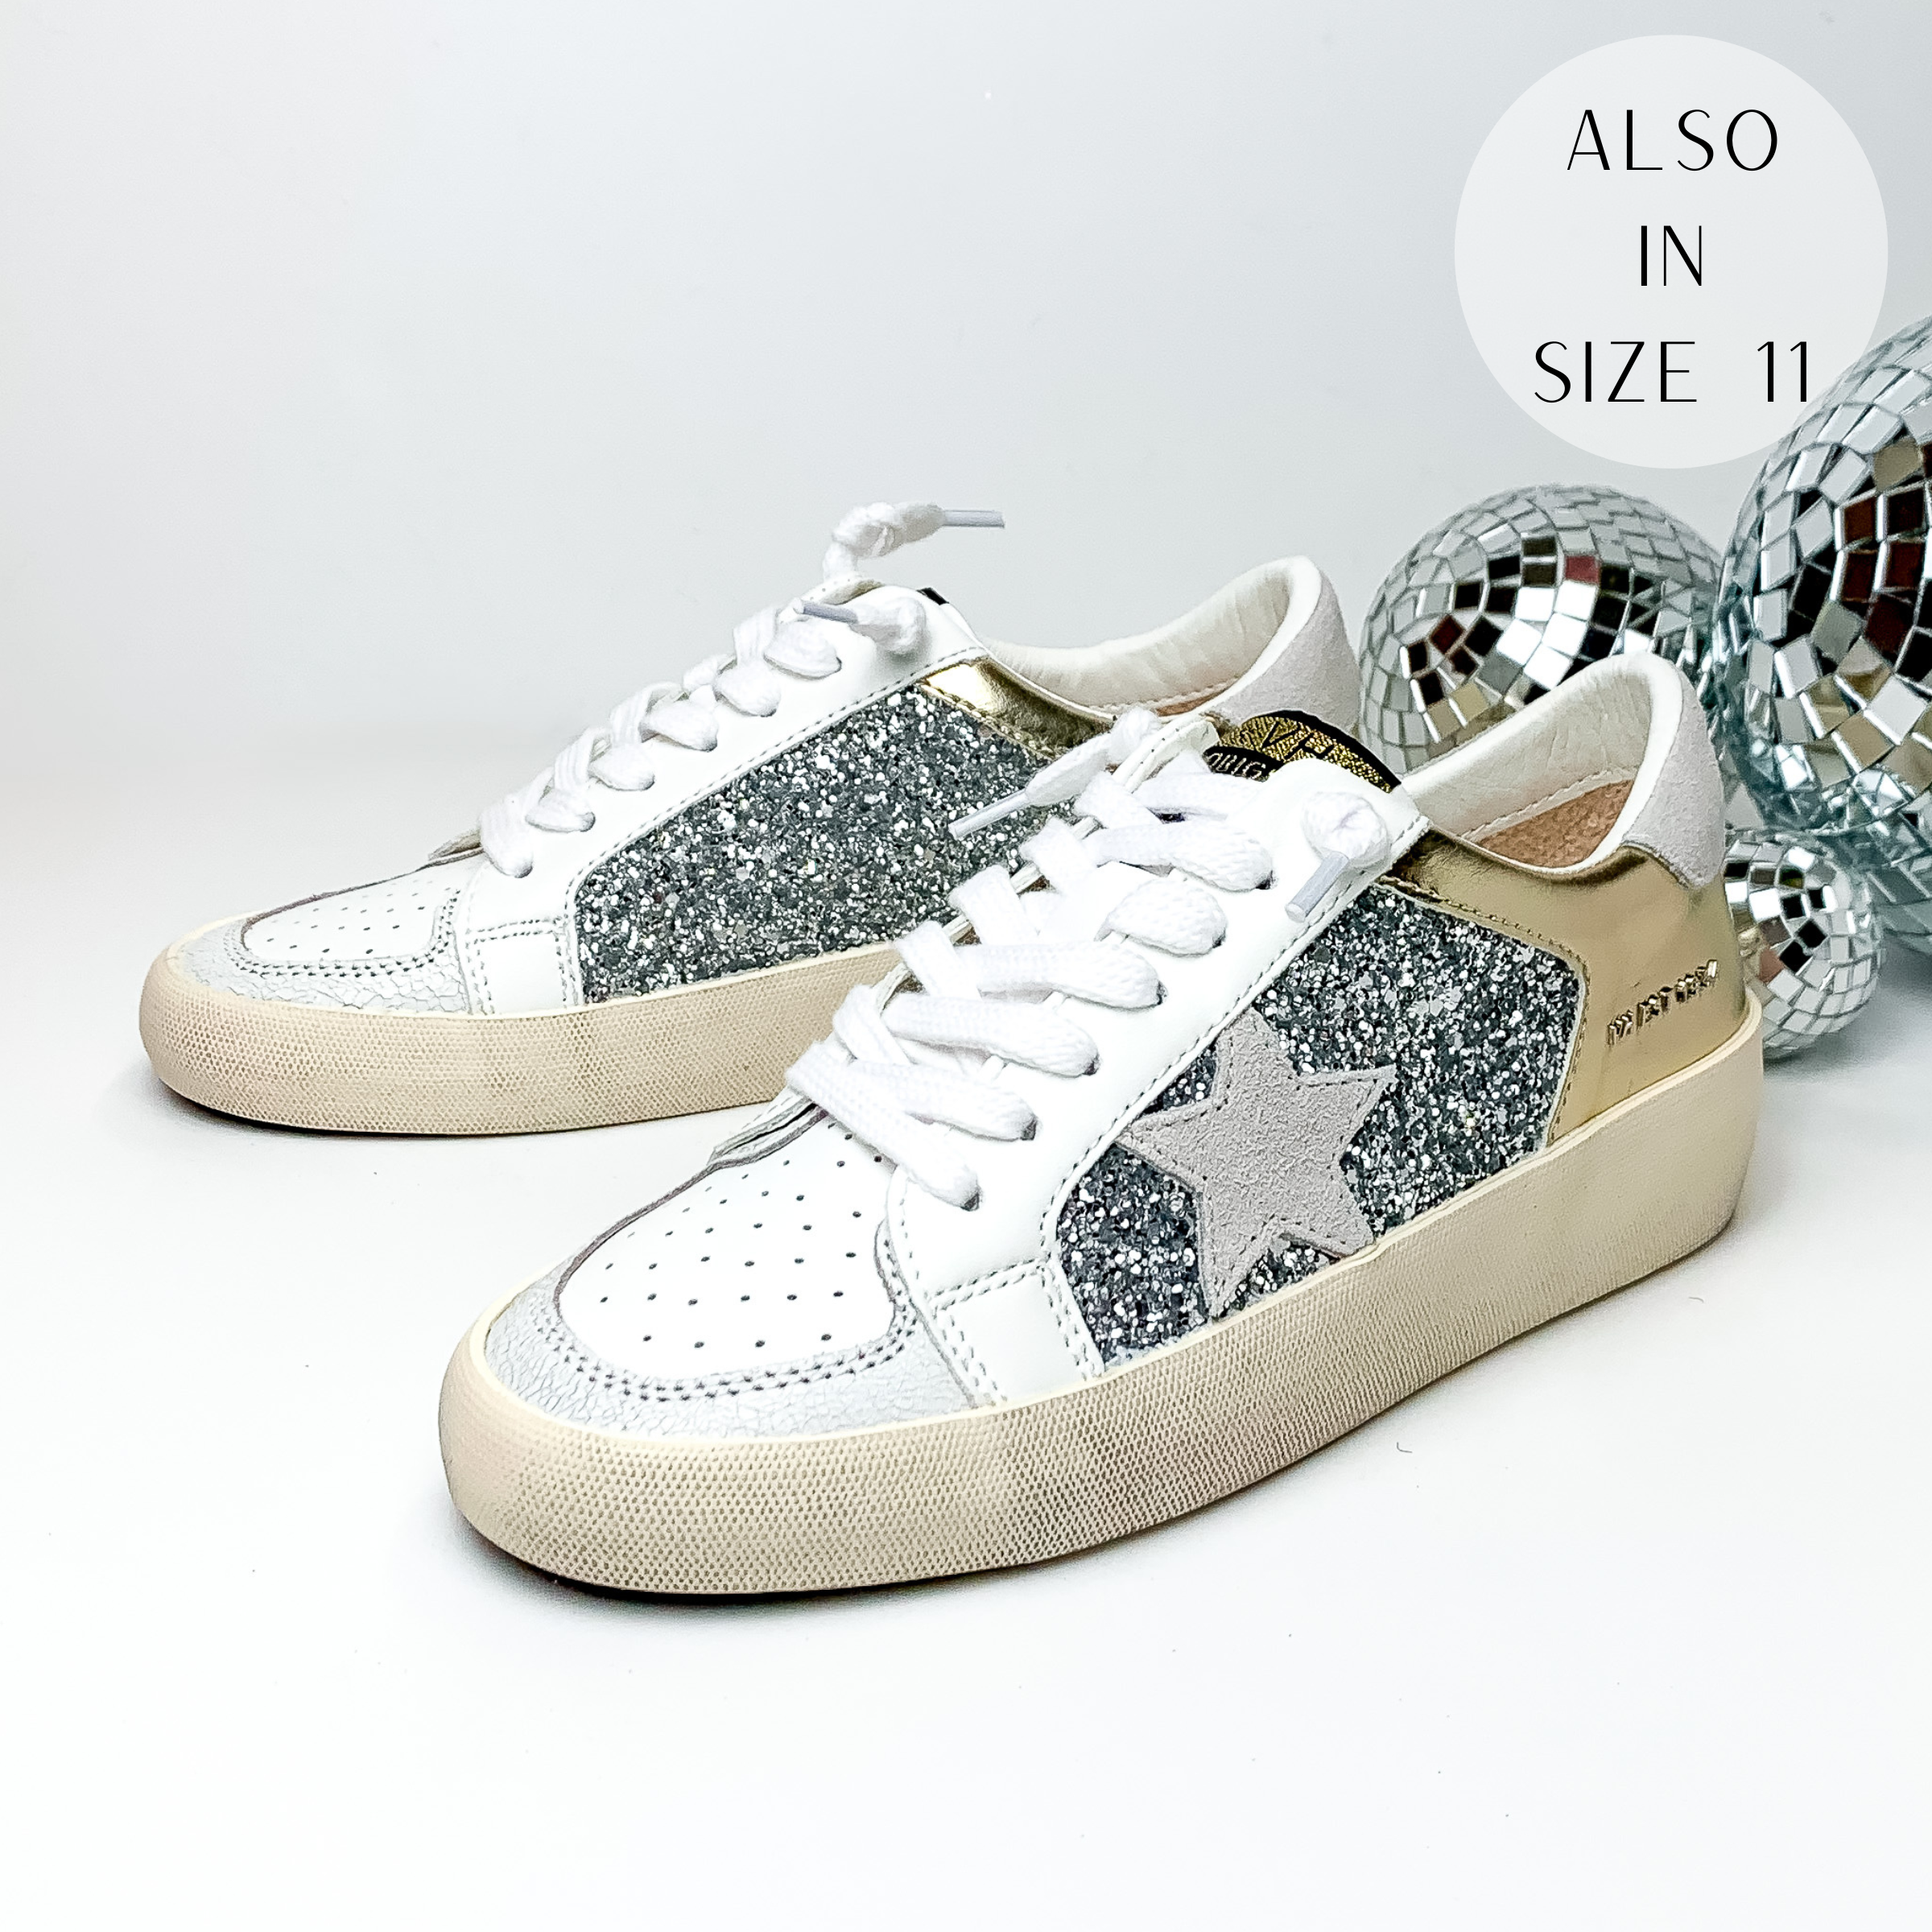 Pictured are white tennis shoes with silver glitter on the sides and a mettalic gold patch on the side and back of the shoe. These shoes also include a light grey patch on the heel, a light grey star emblem on the side of the shoe. These shoes are pictured on a white background with disco balls behind them on the right hand side.